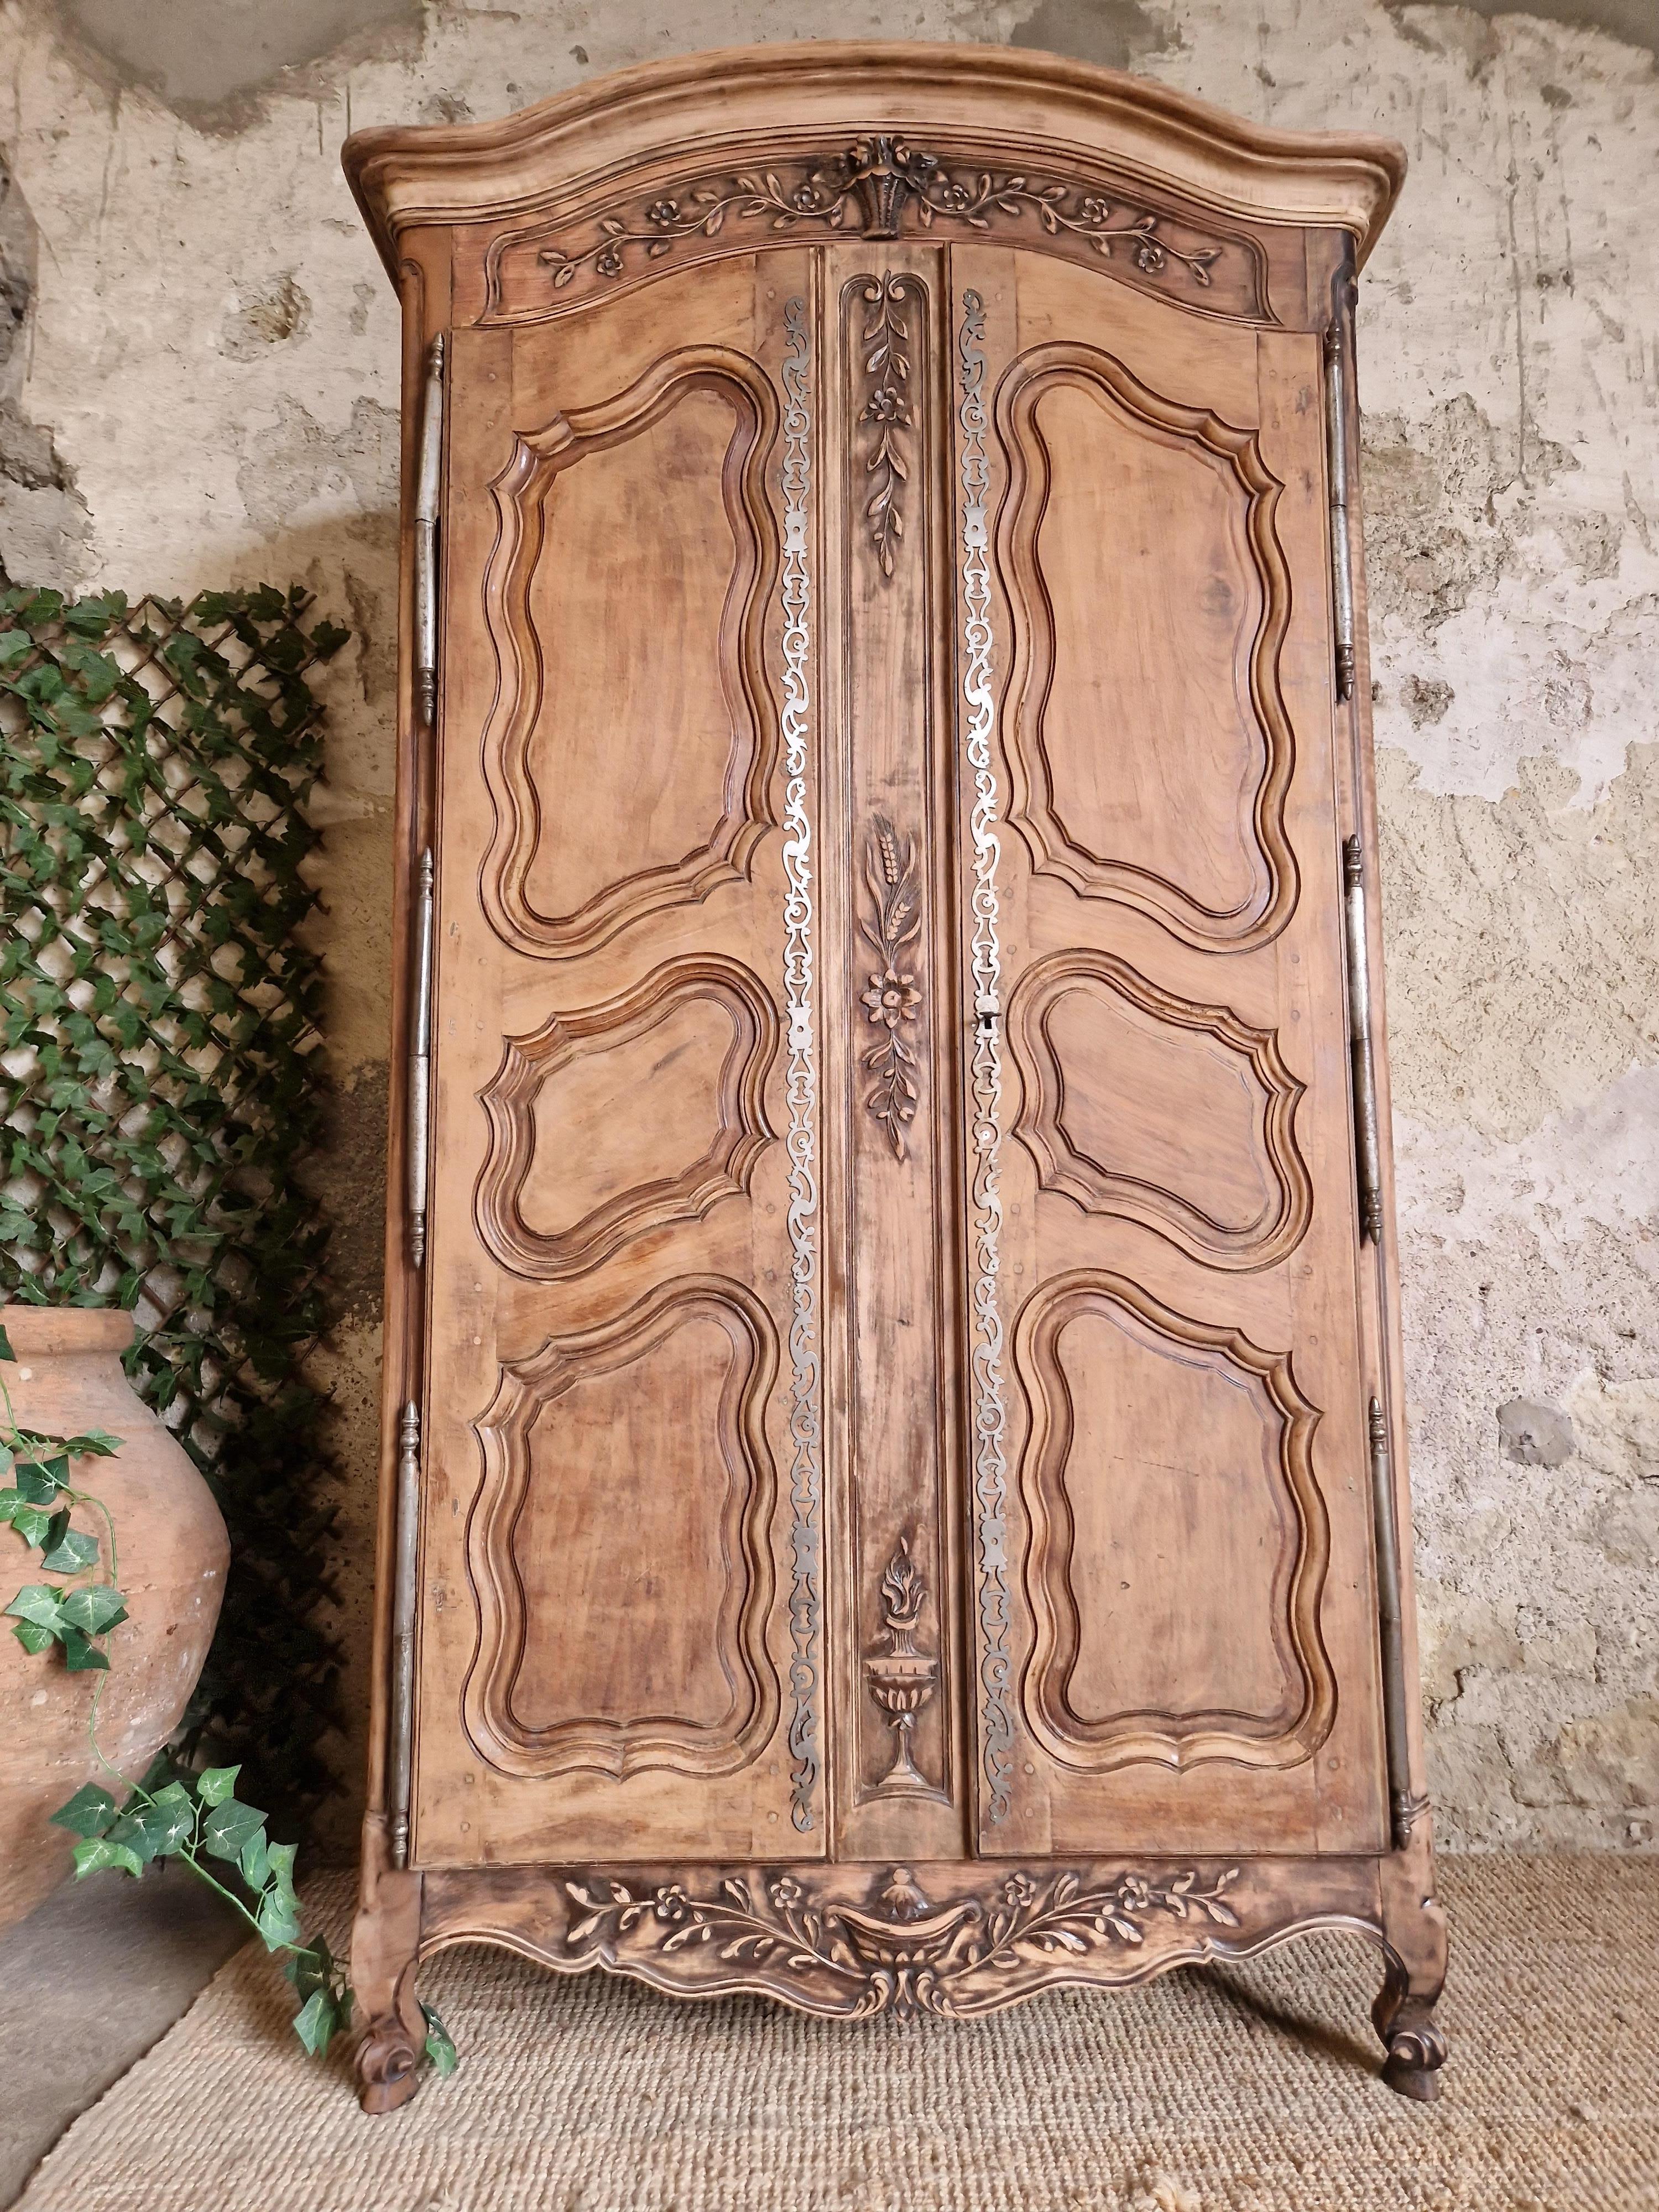 This beautiful freestanding wardrobe from the 19th century is crafted from solid wood. This antique piece features carvings, iron work decorative plaques with a working lock. The solid wood finish has been stripped back give it a rustic look that